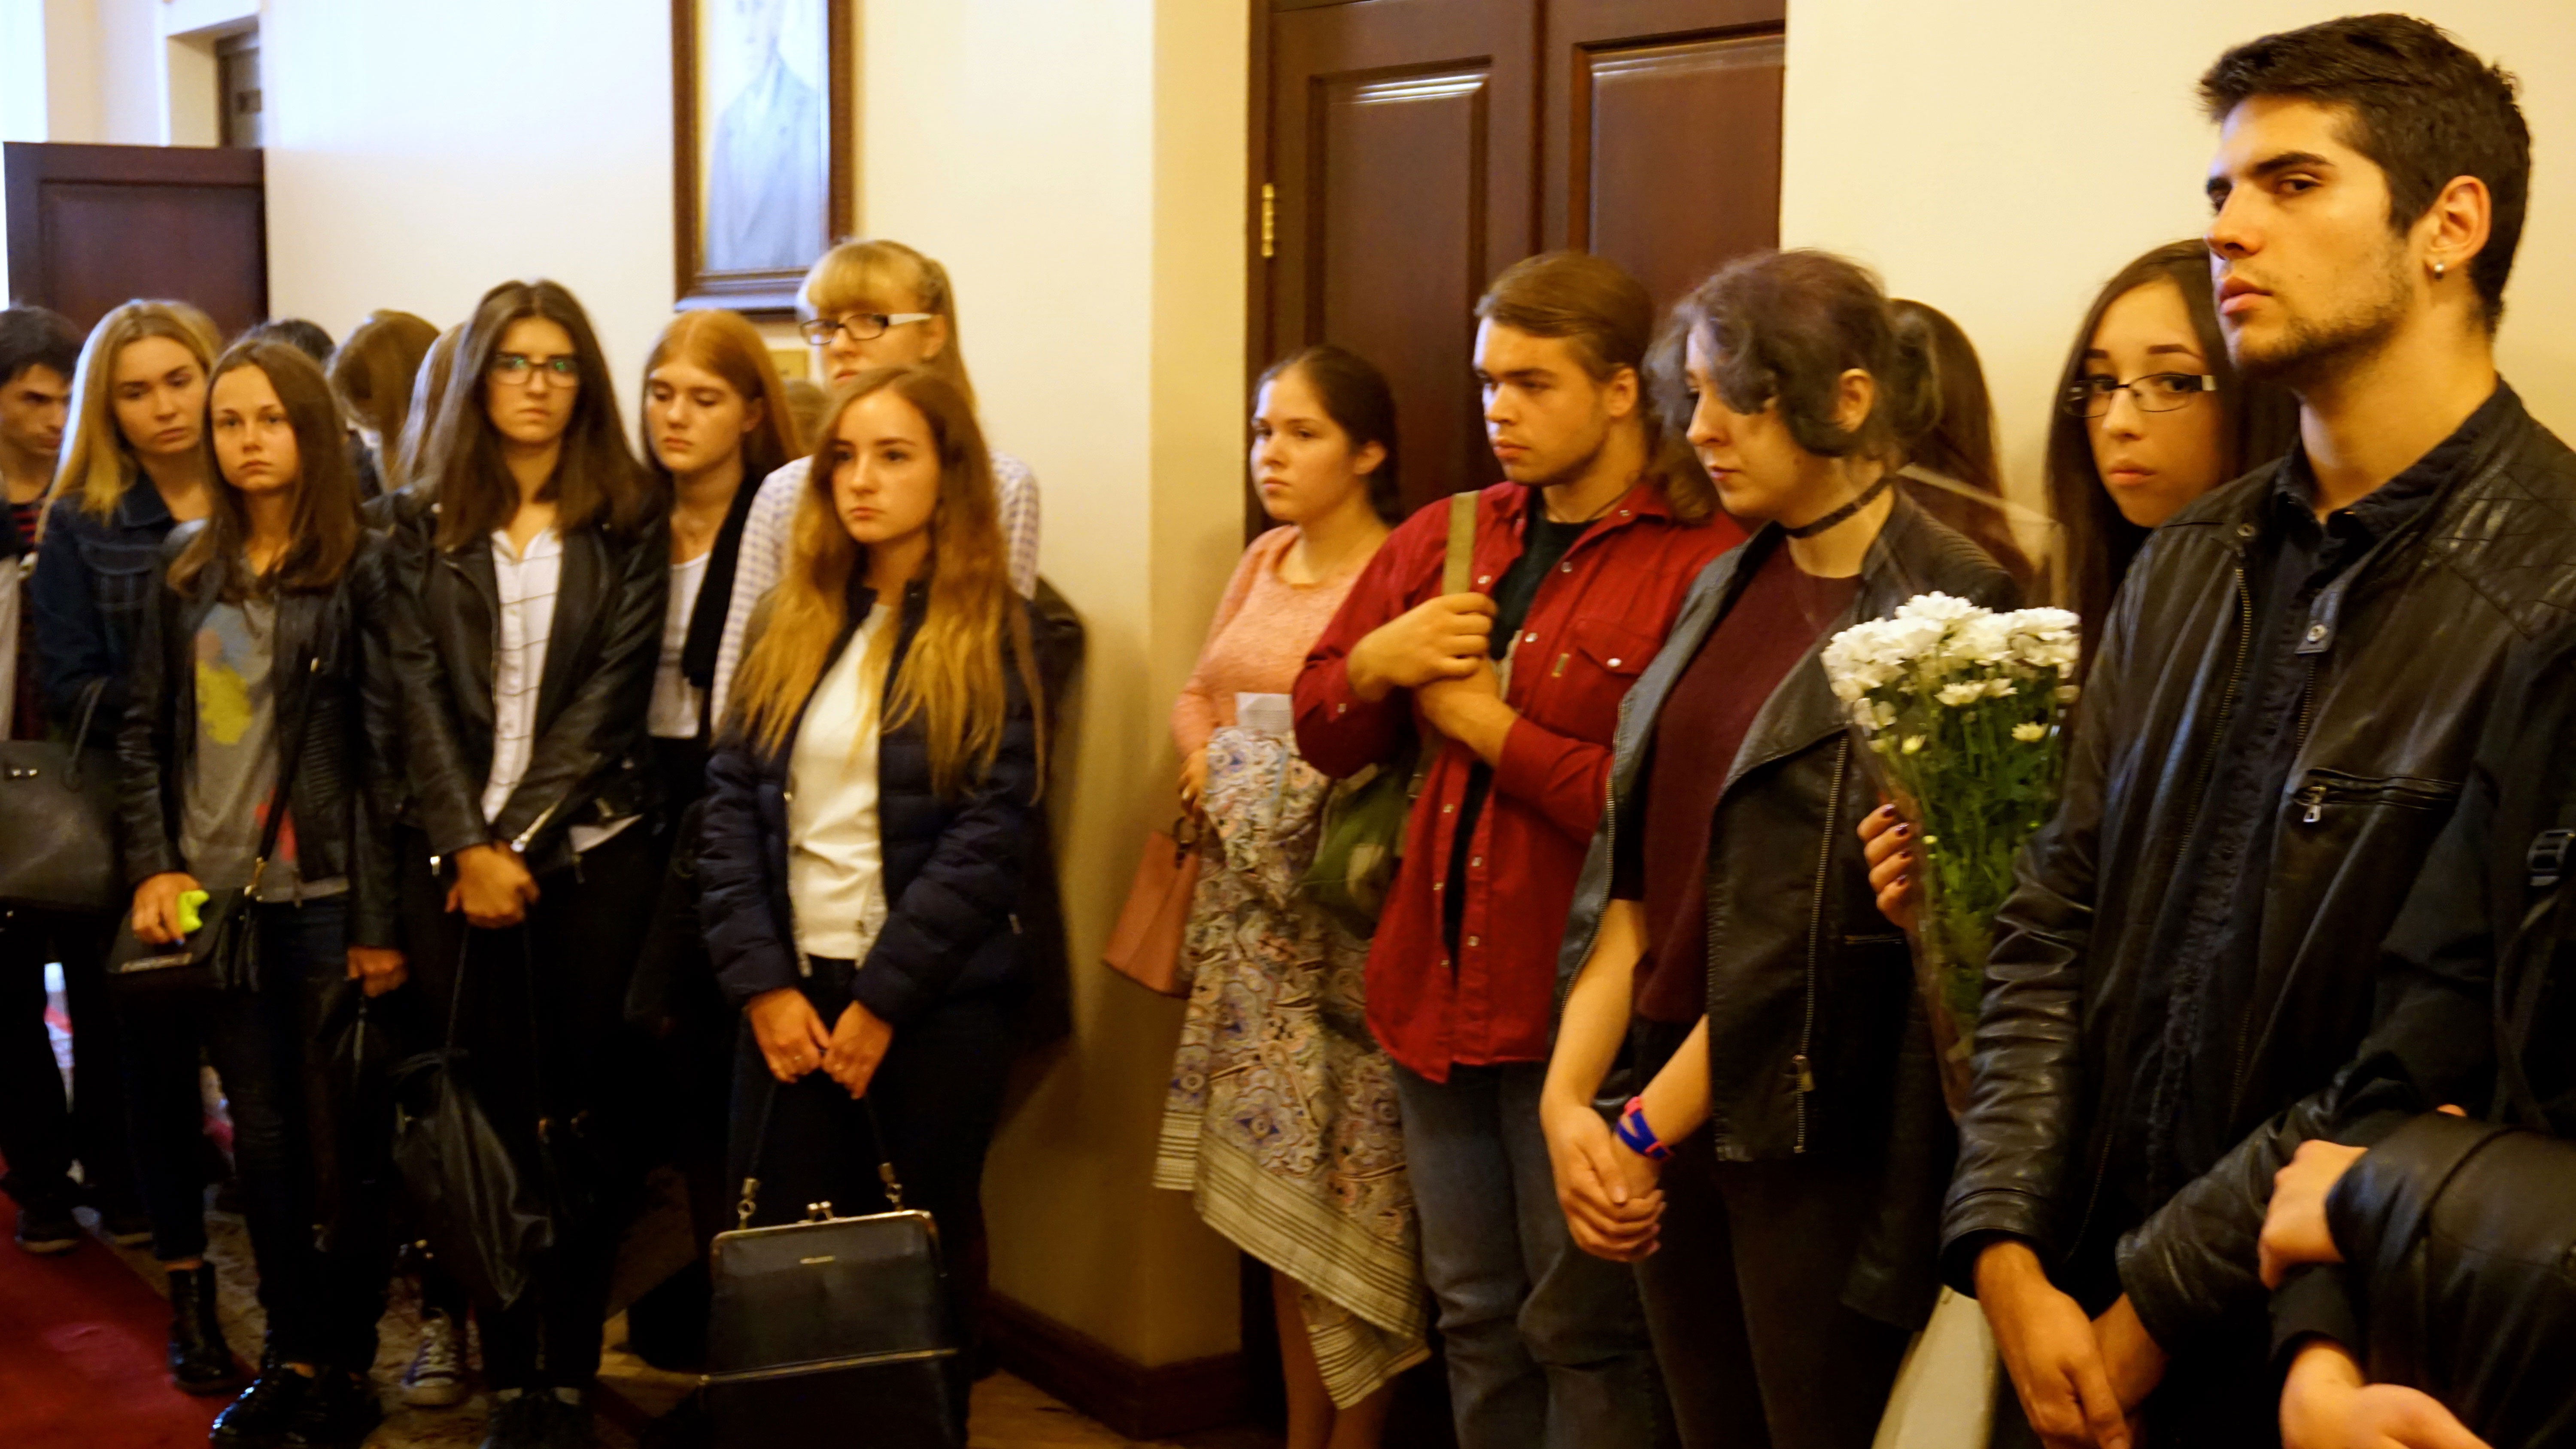 University students gathered for a memorial ceremony to commemorate the two-year anniversary of Sviatoslav Horbenko’s death while fighting in eastern Ukraine. (Photo: Nolan Peterson/The Daily Signal)